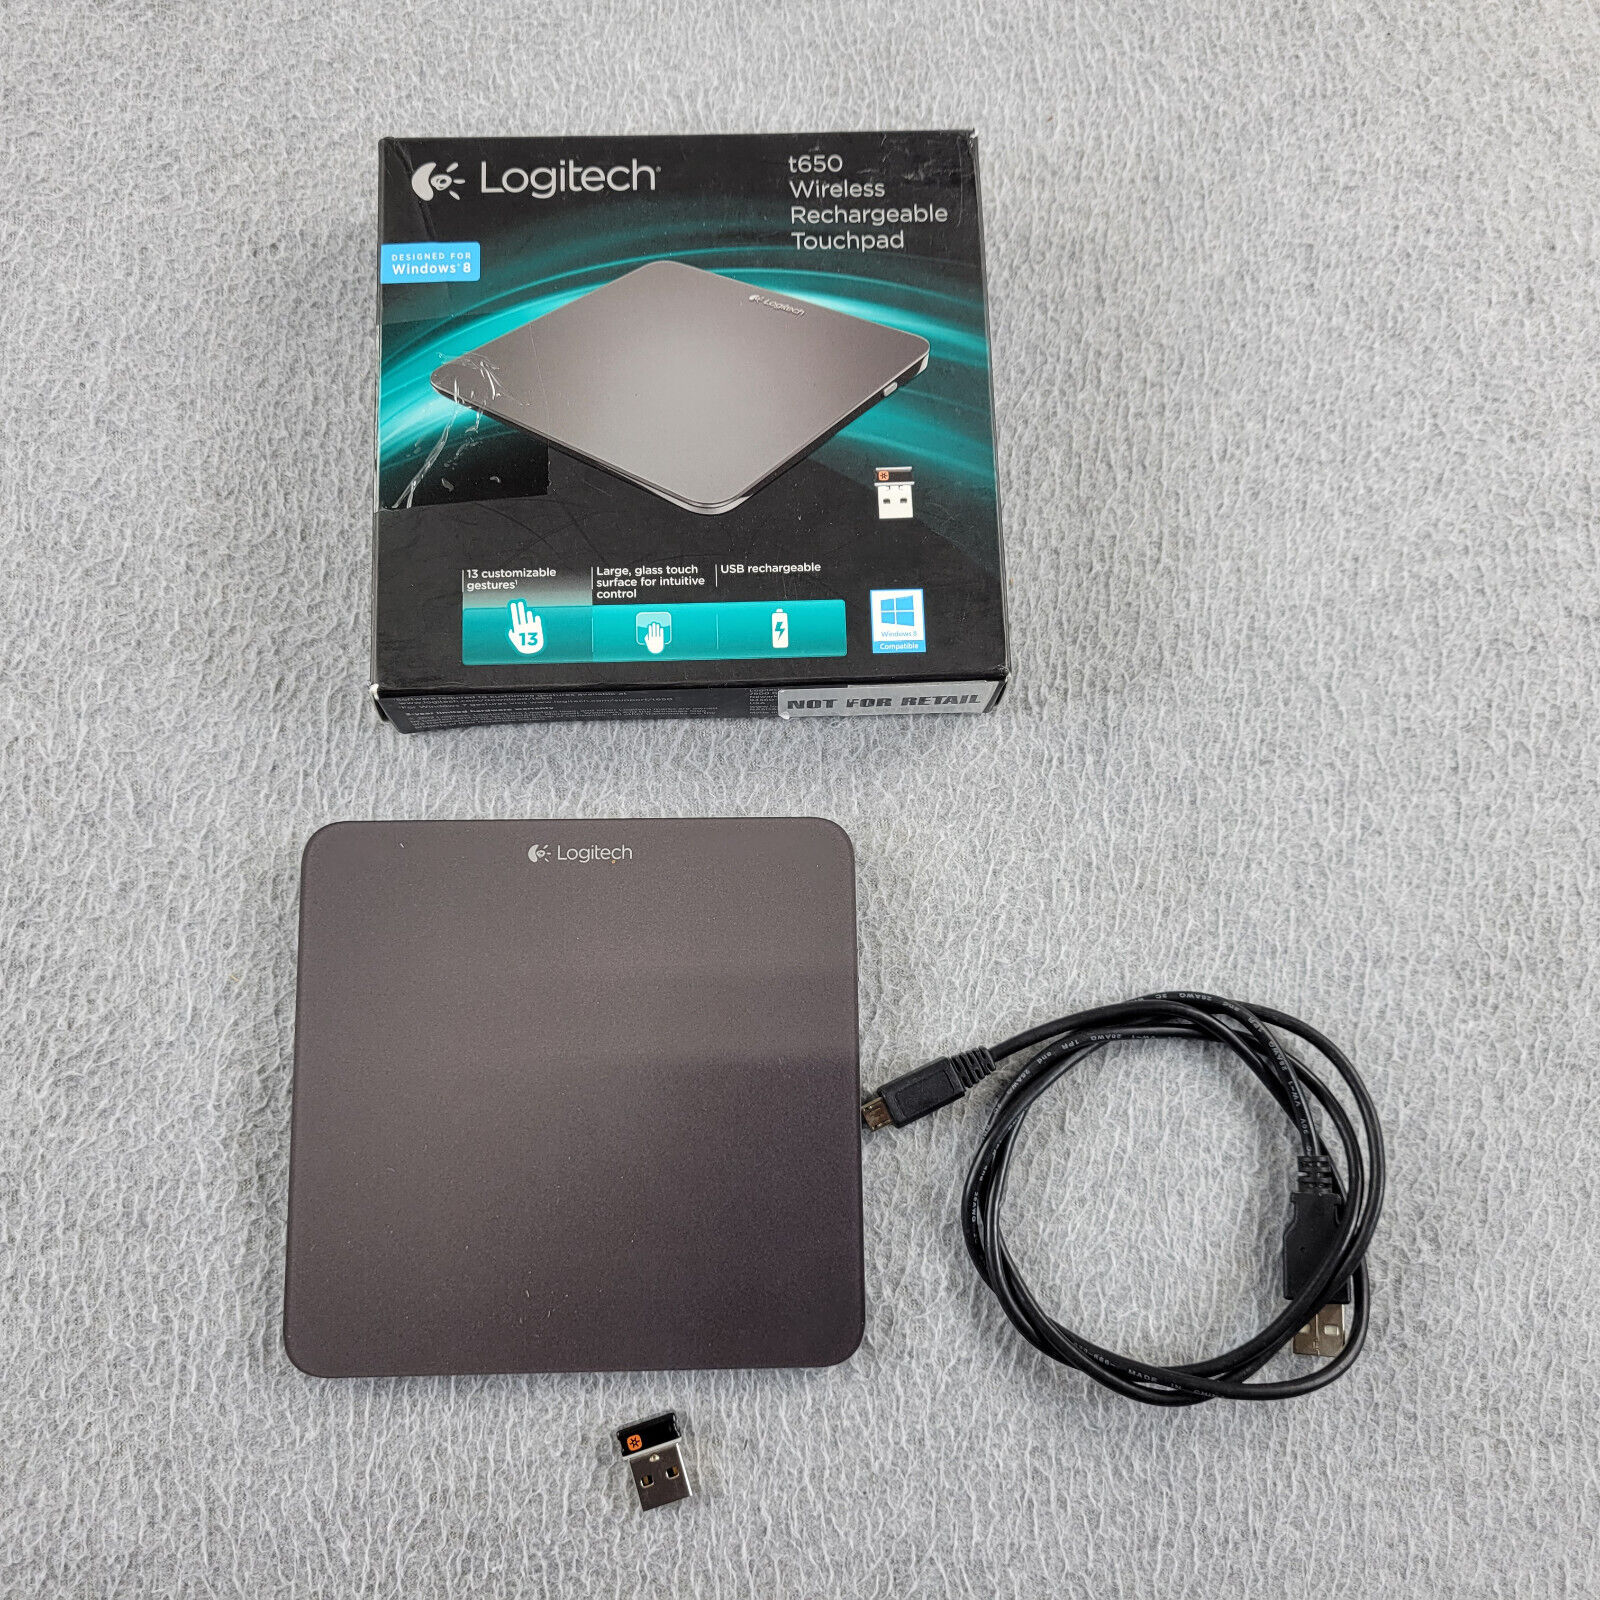 Logitech Wireless Rechargeable Touchpad T650 Unifying Receiver Tested MultiTouch